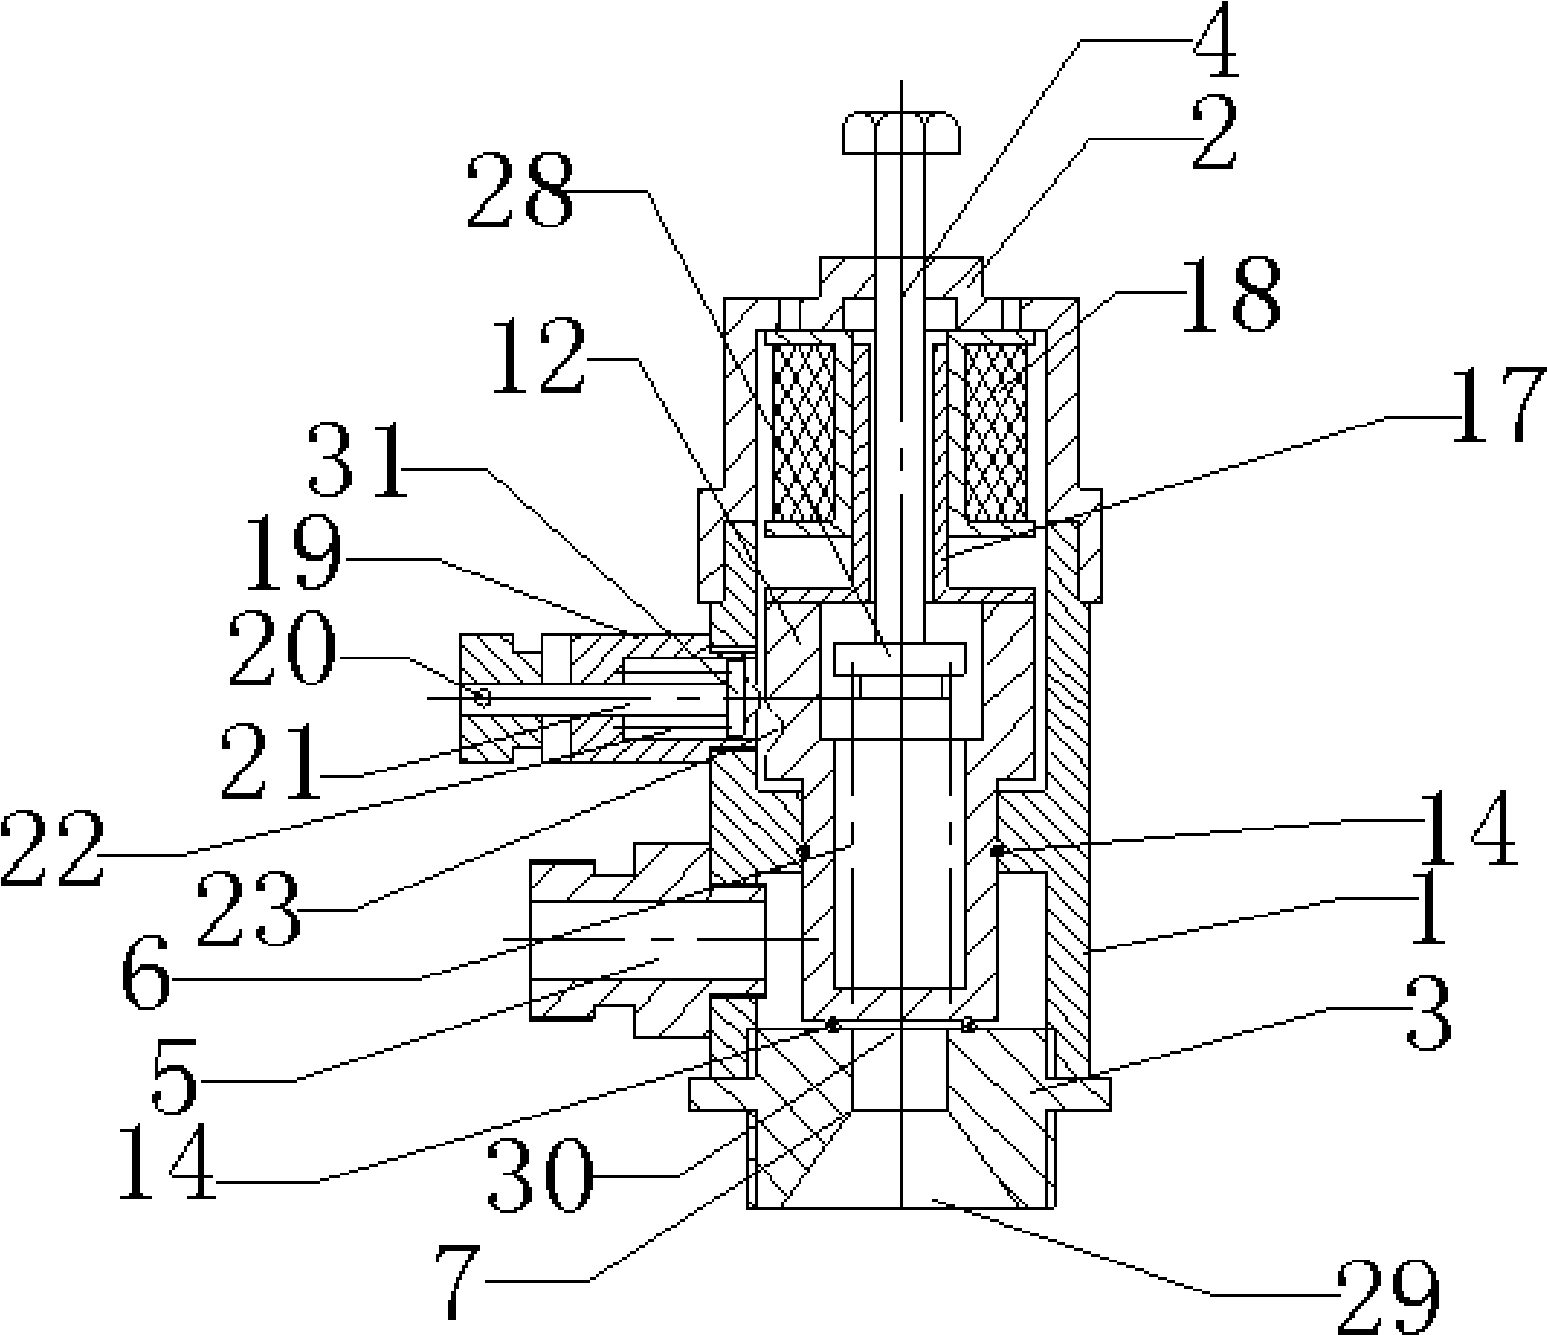 Security induction valve and security buffering two-purpose valve employing the same